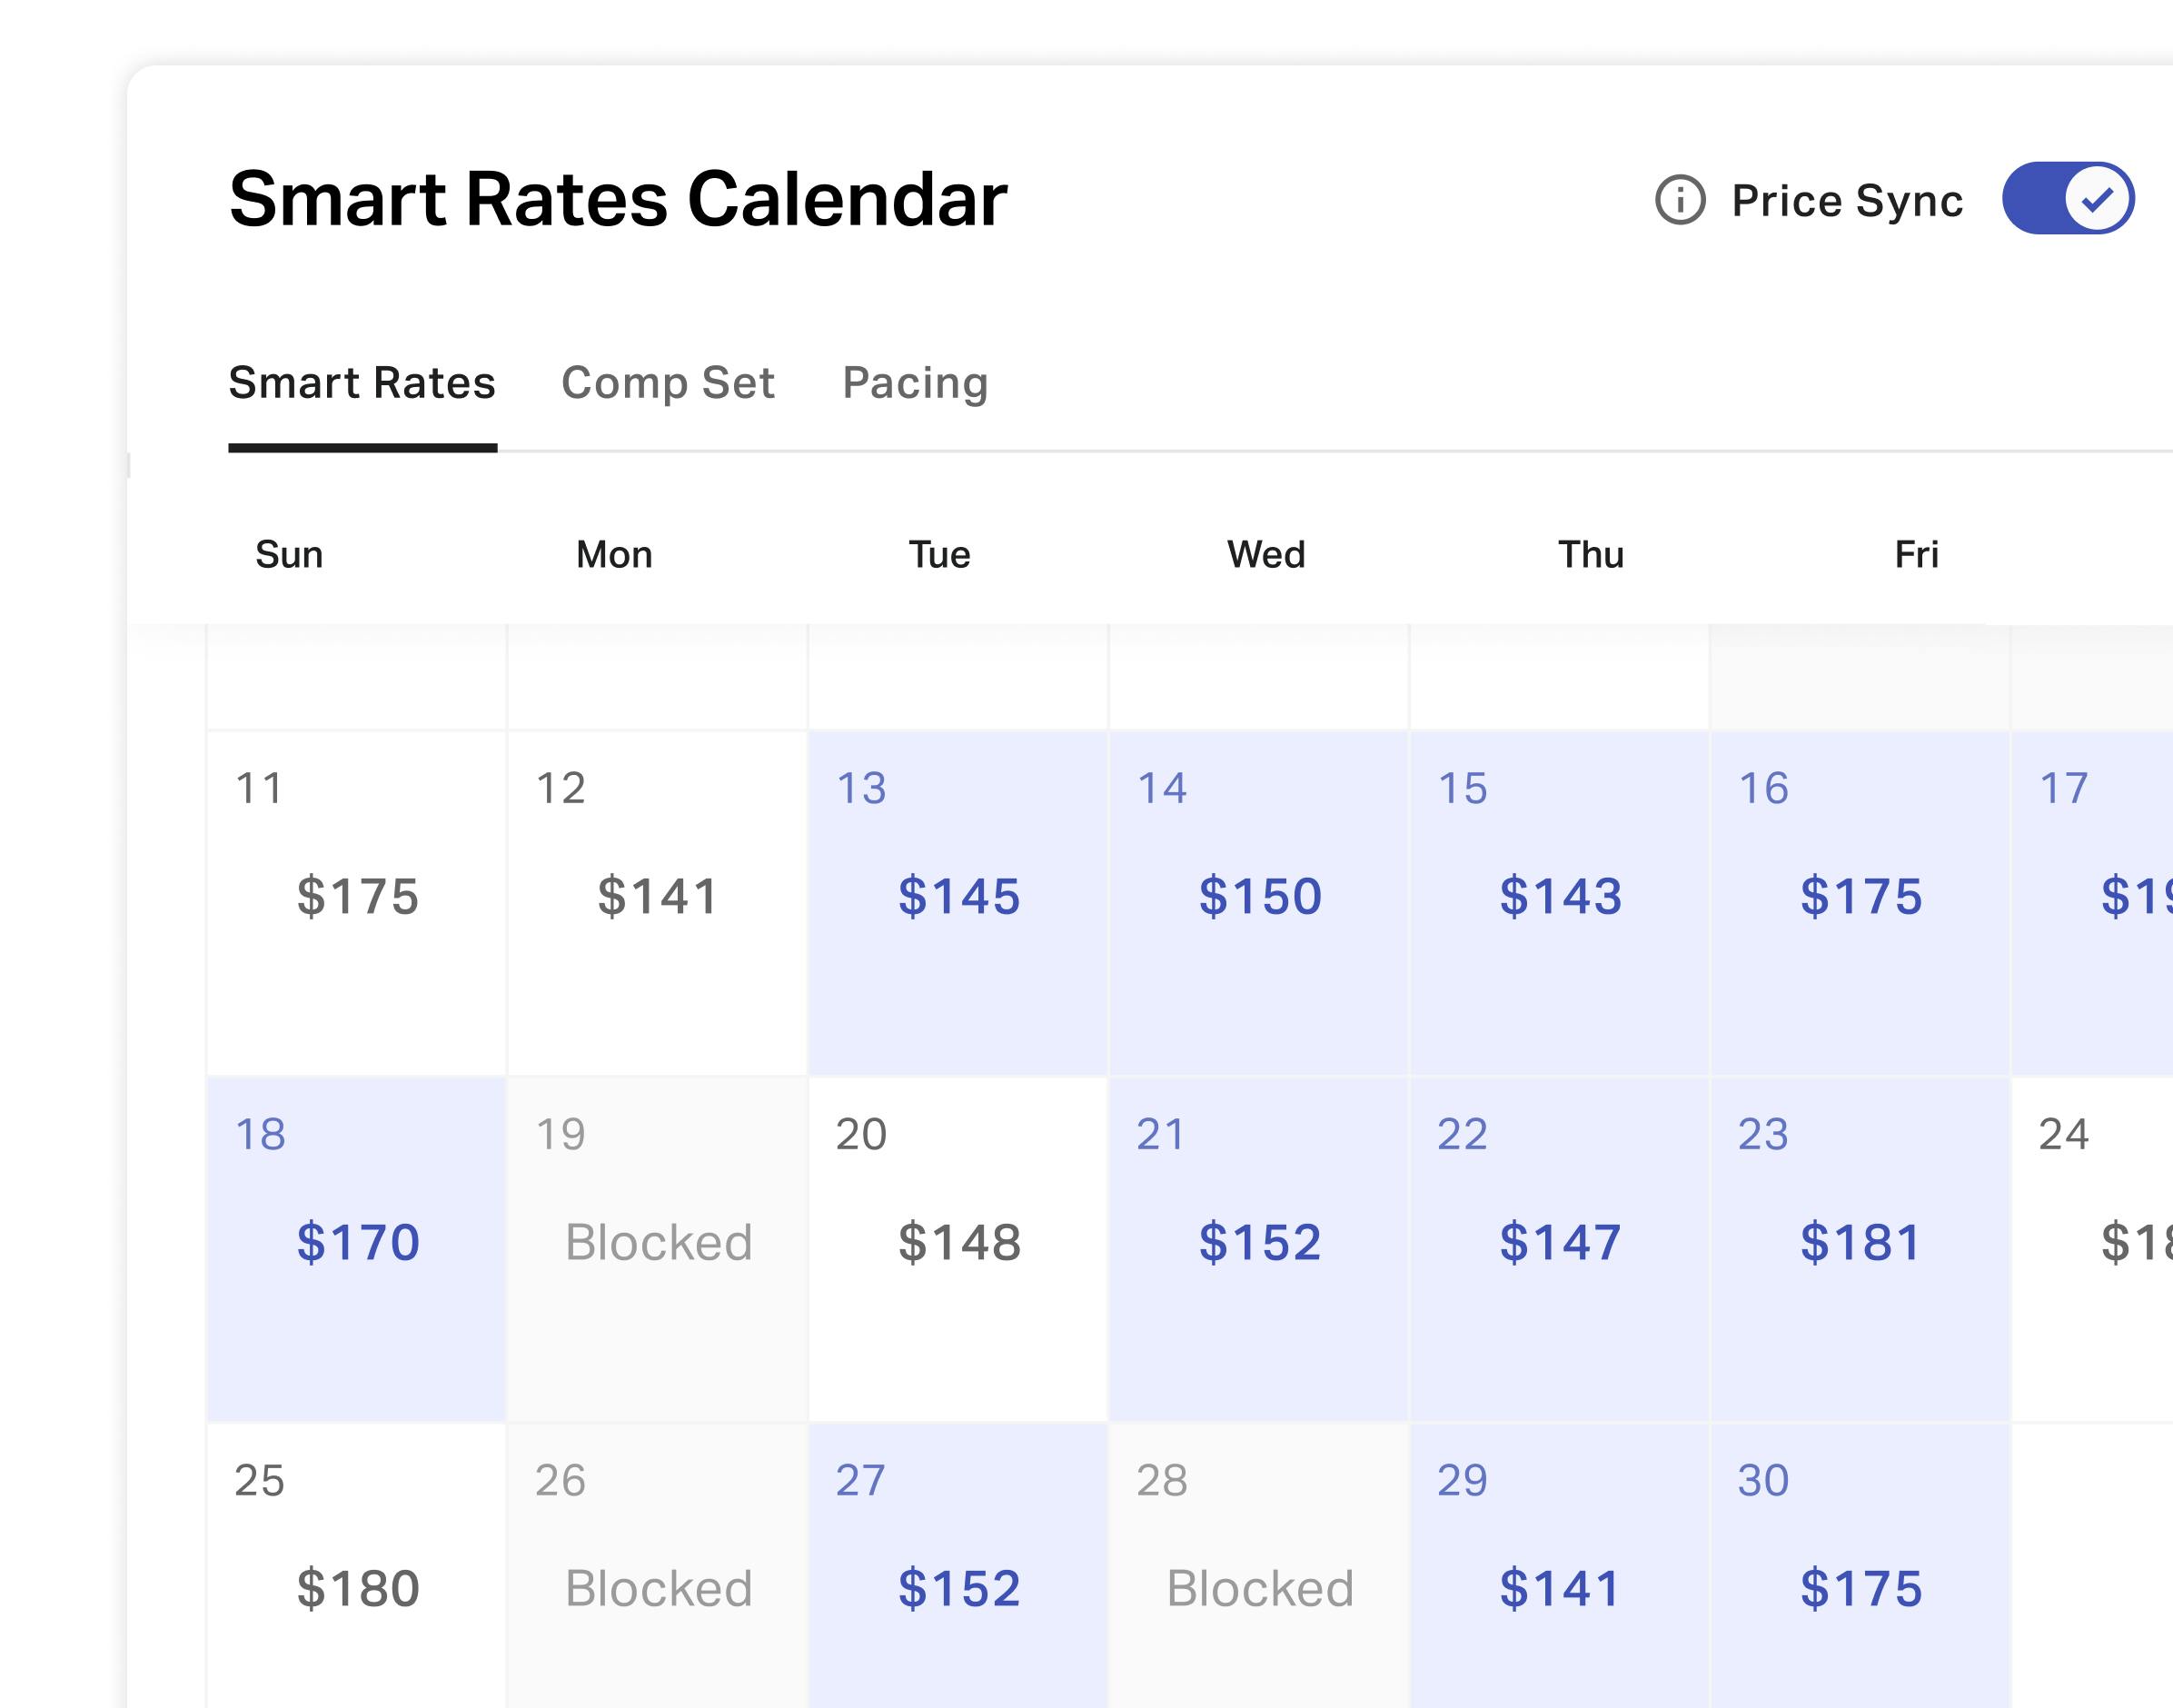 Revenue Management and Dynamic Pricing tool for rentals